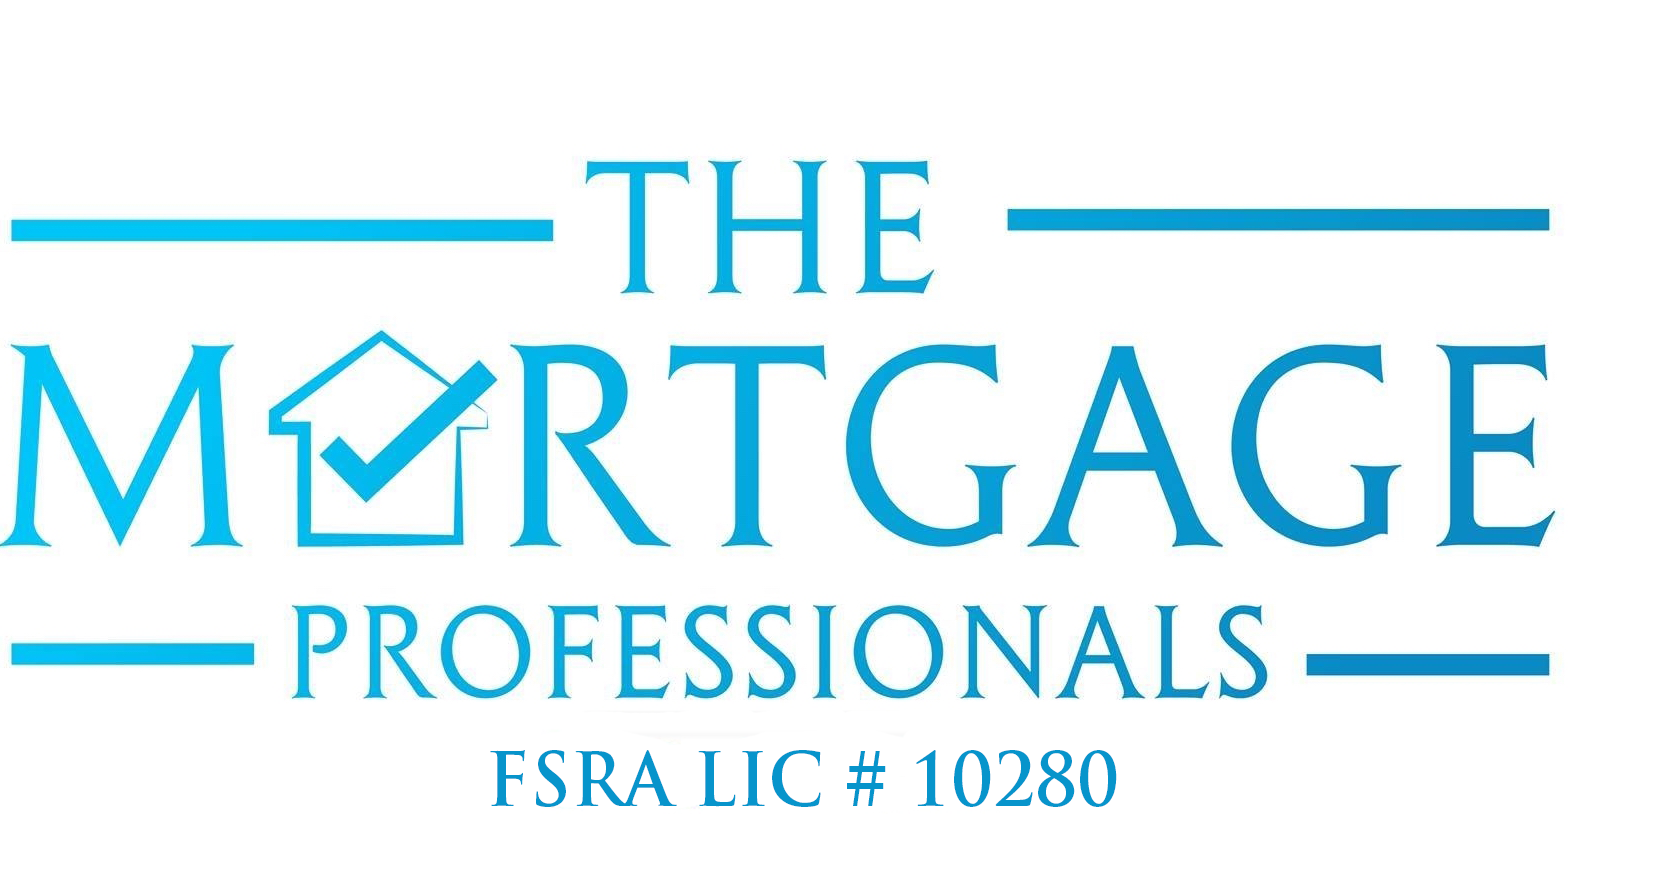 Kingston Mortgage Brokers  | The Mortgage Professionals